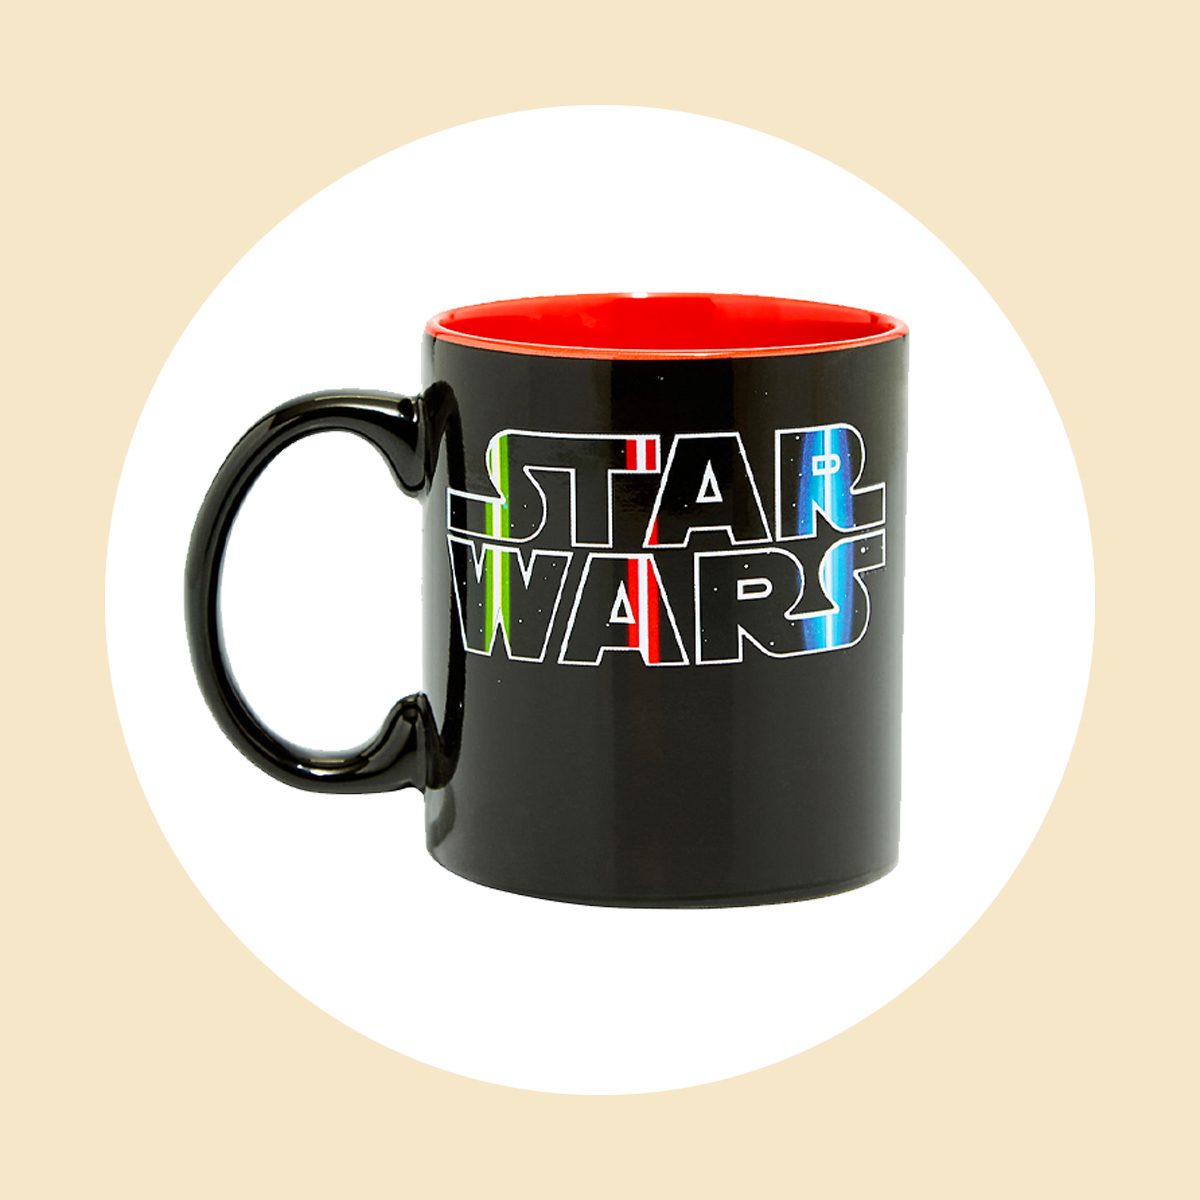 Star Wars May The Force Be with You Heat Change Ceramic Mug